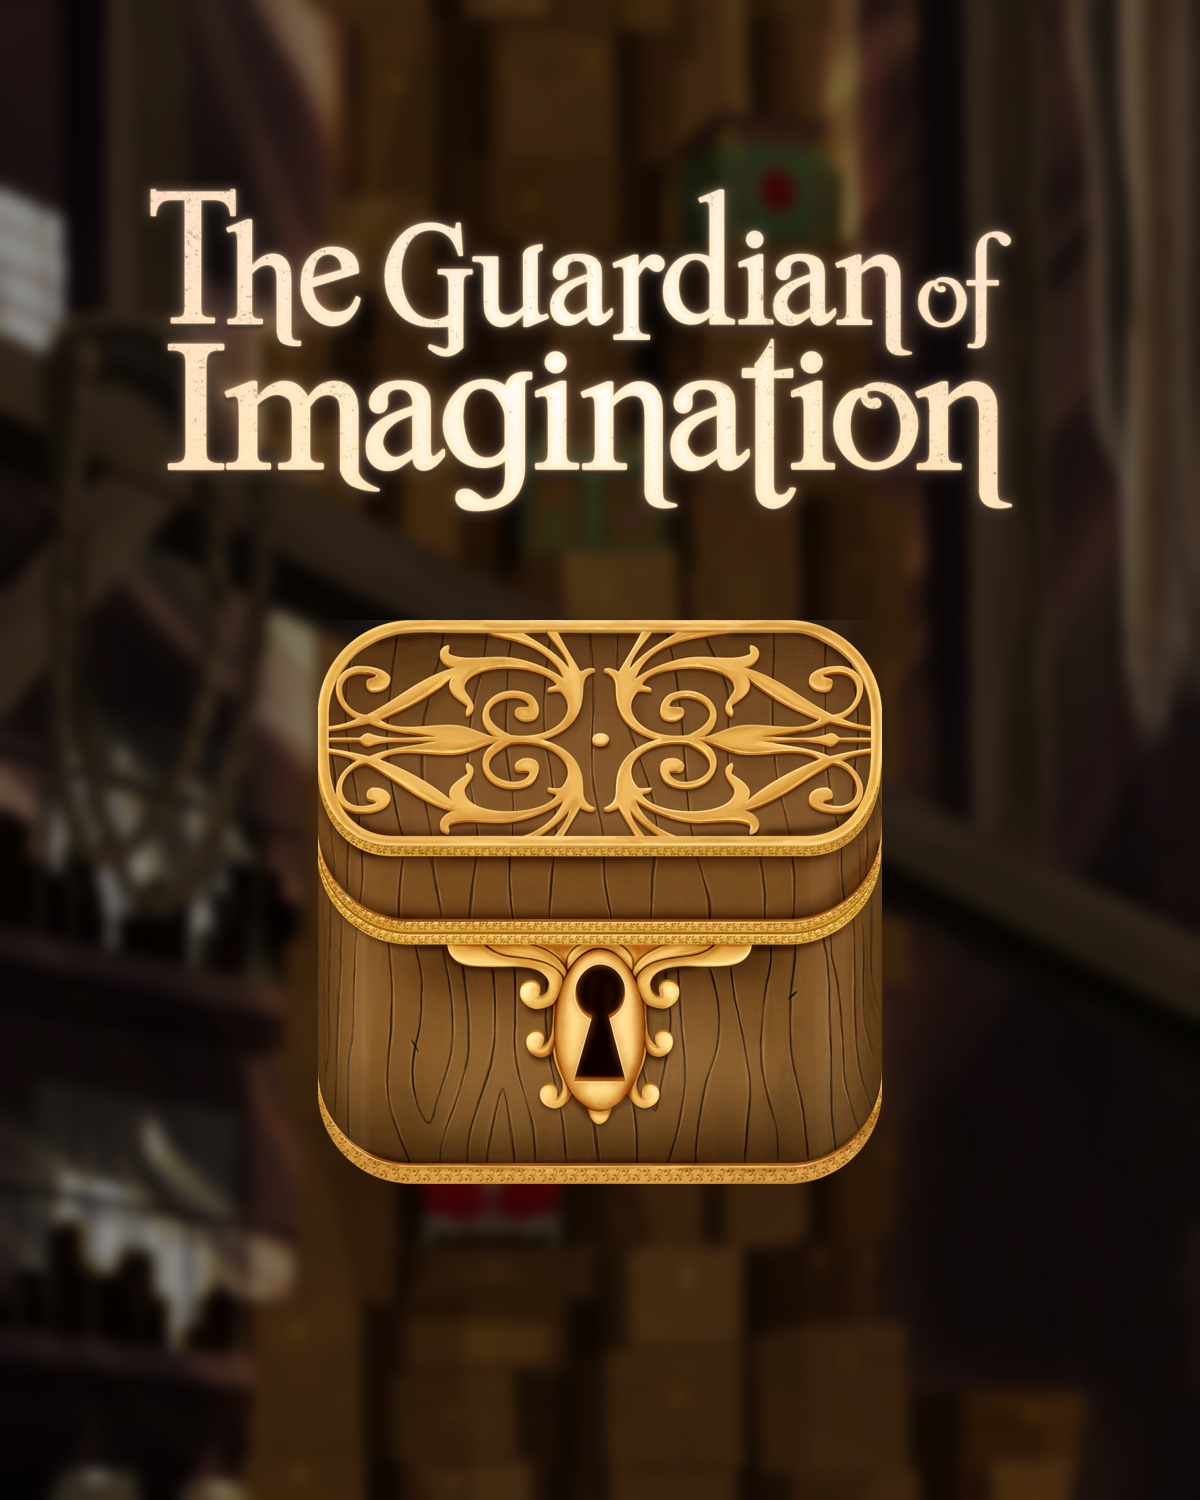 The Guardian of Imagination